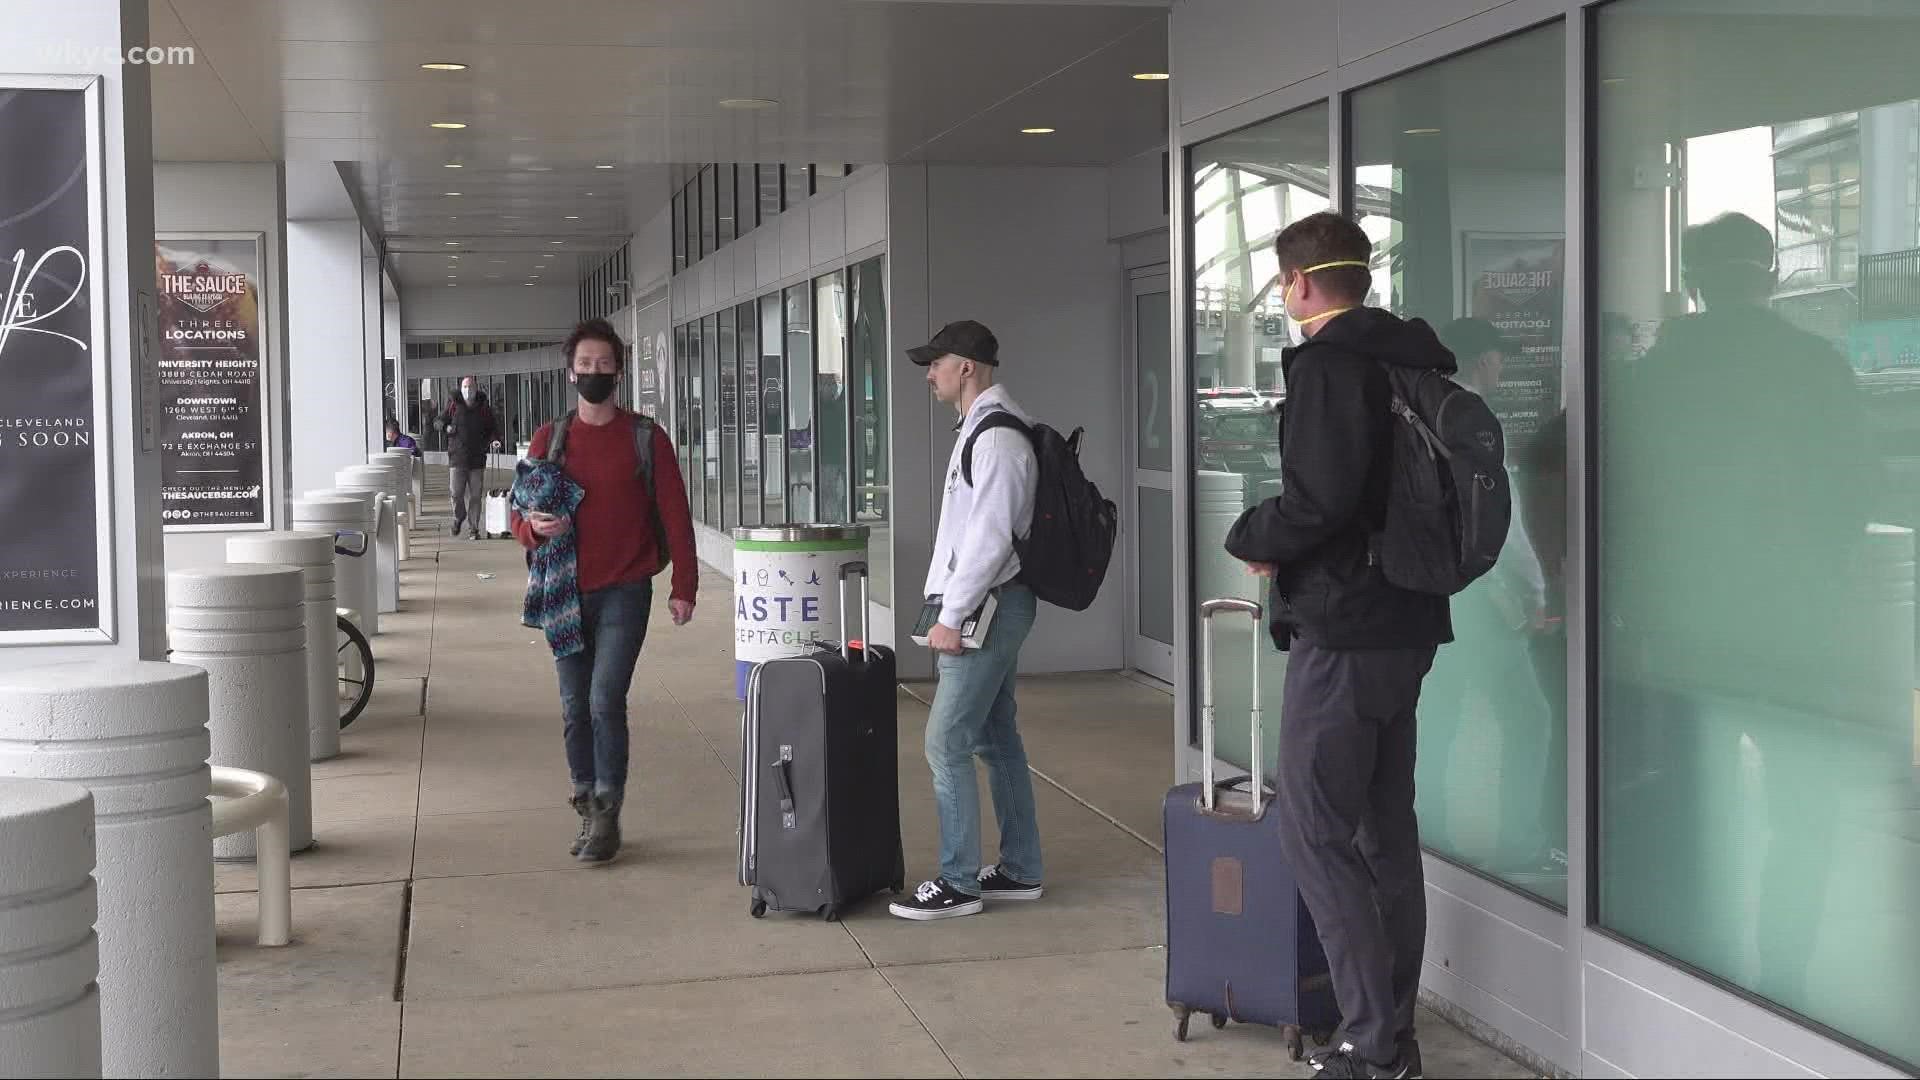 The impact in Cleveland was minute on Christmas Eve. But flight cancellations moving forward remain uncertain, especially in the next 10 days.